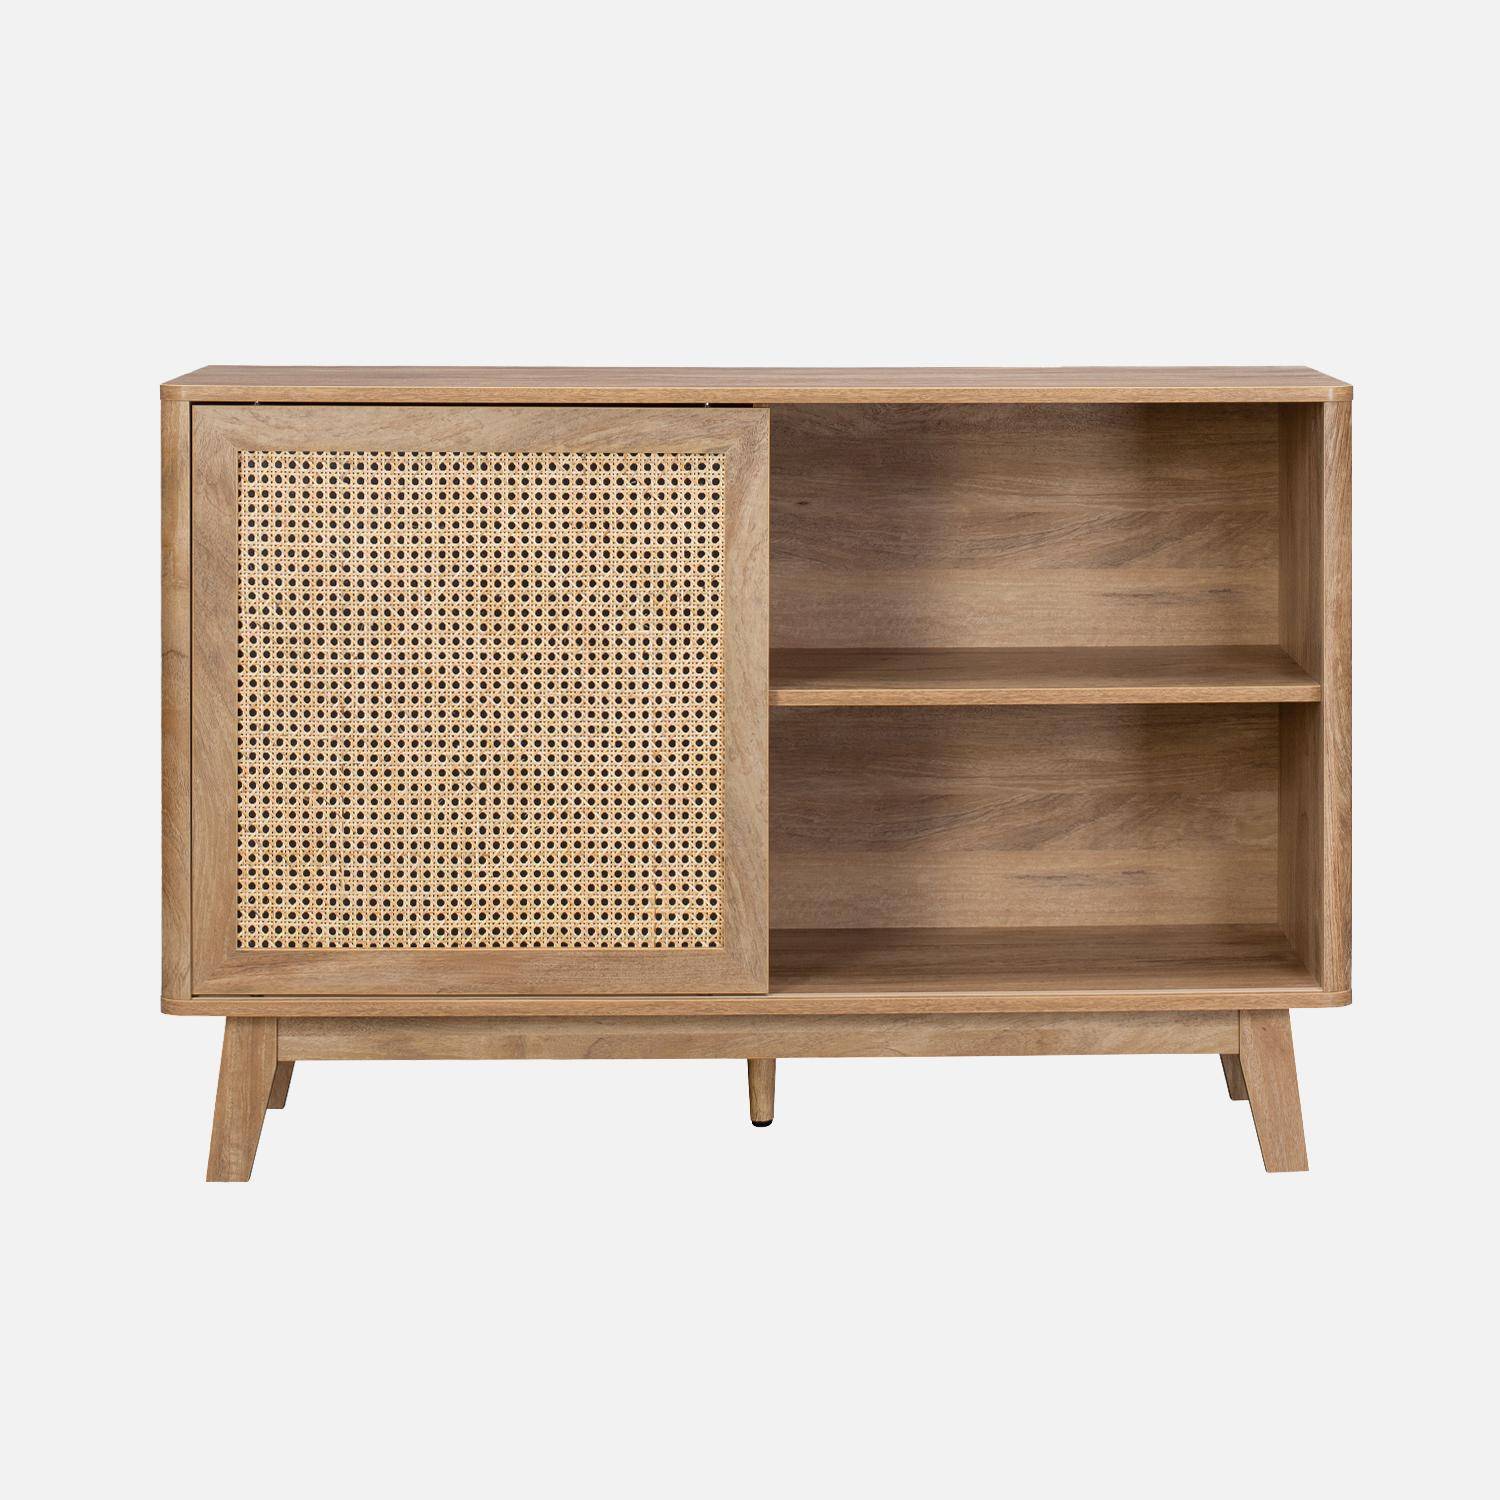 120cm sideboard with 1 sliding door and shelves, wood effect and cane detail Photo2